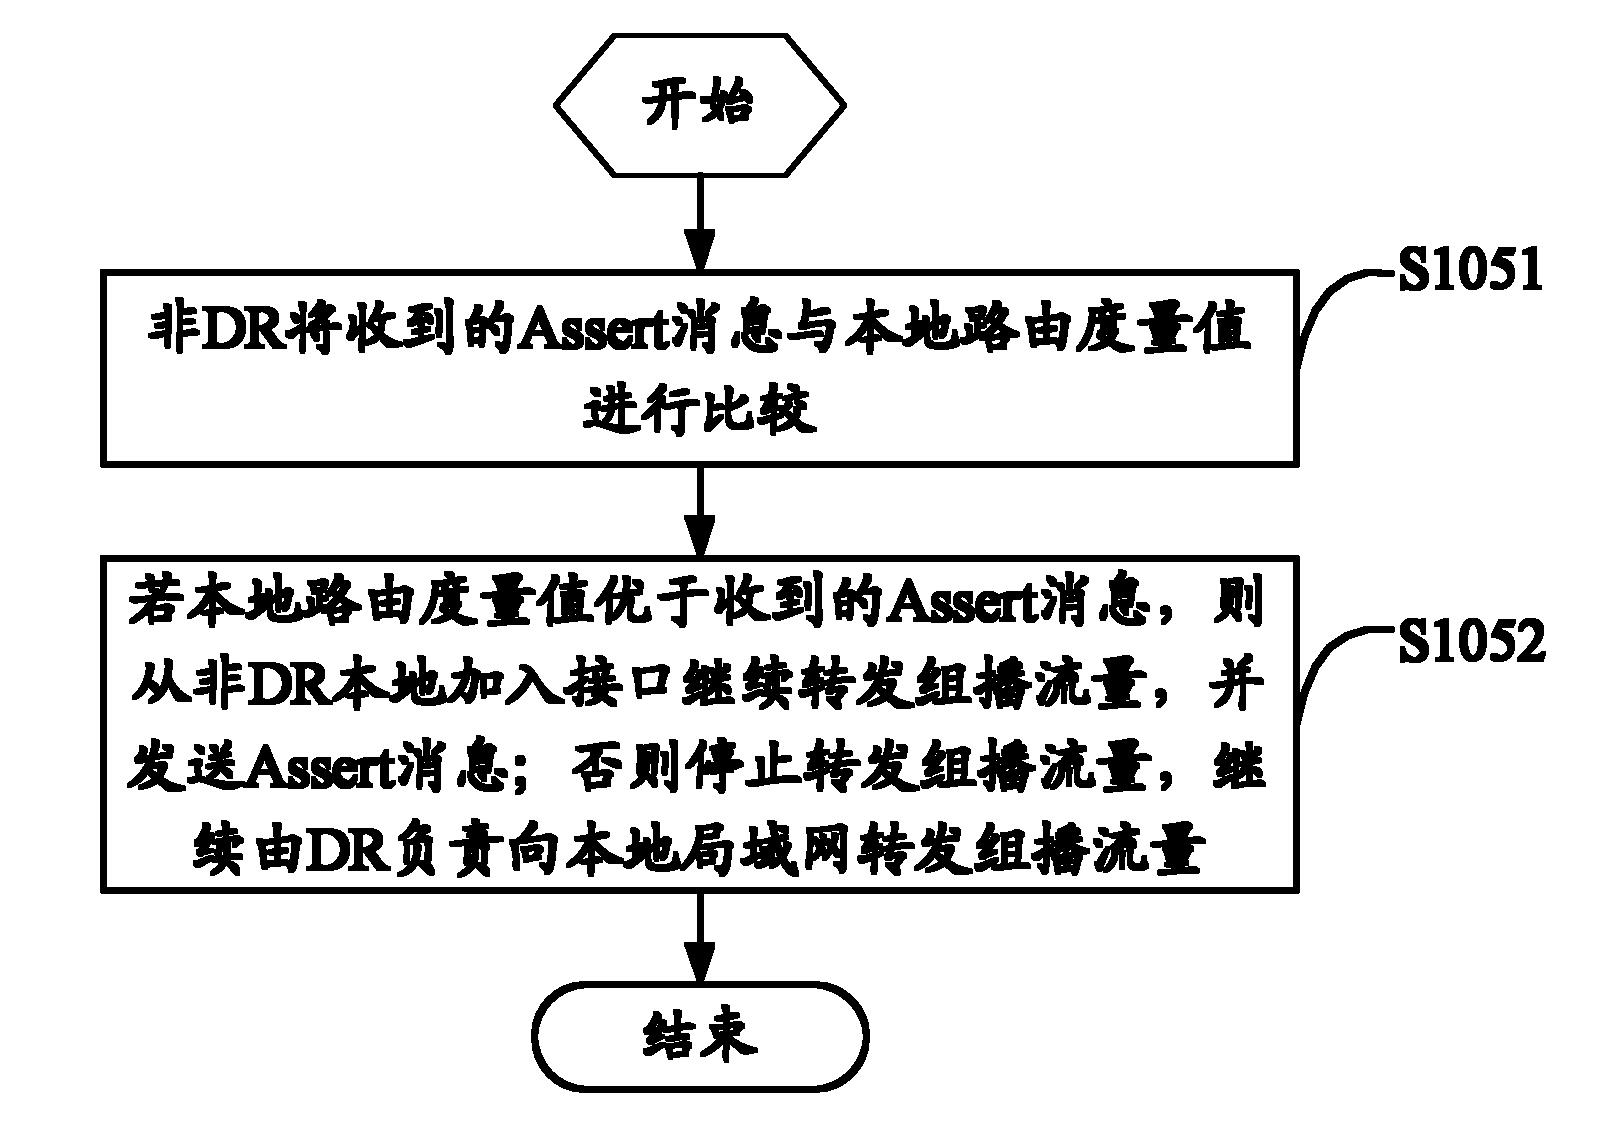 Multicast flow forwarding method and multicast router in local area network